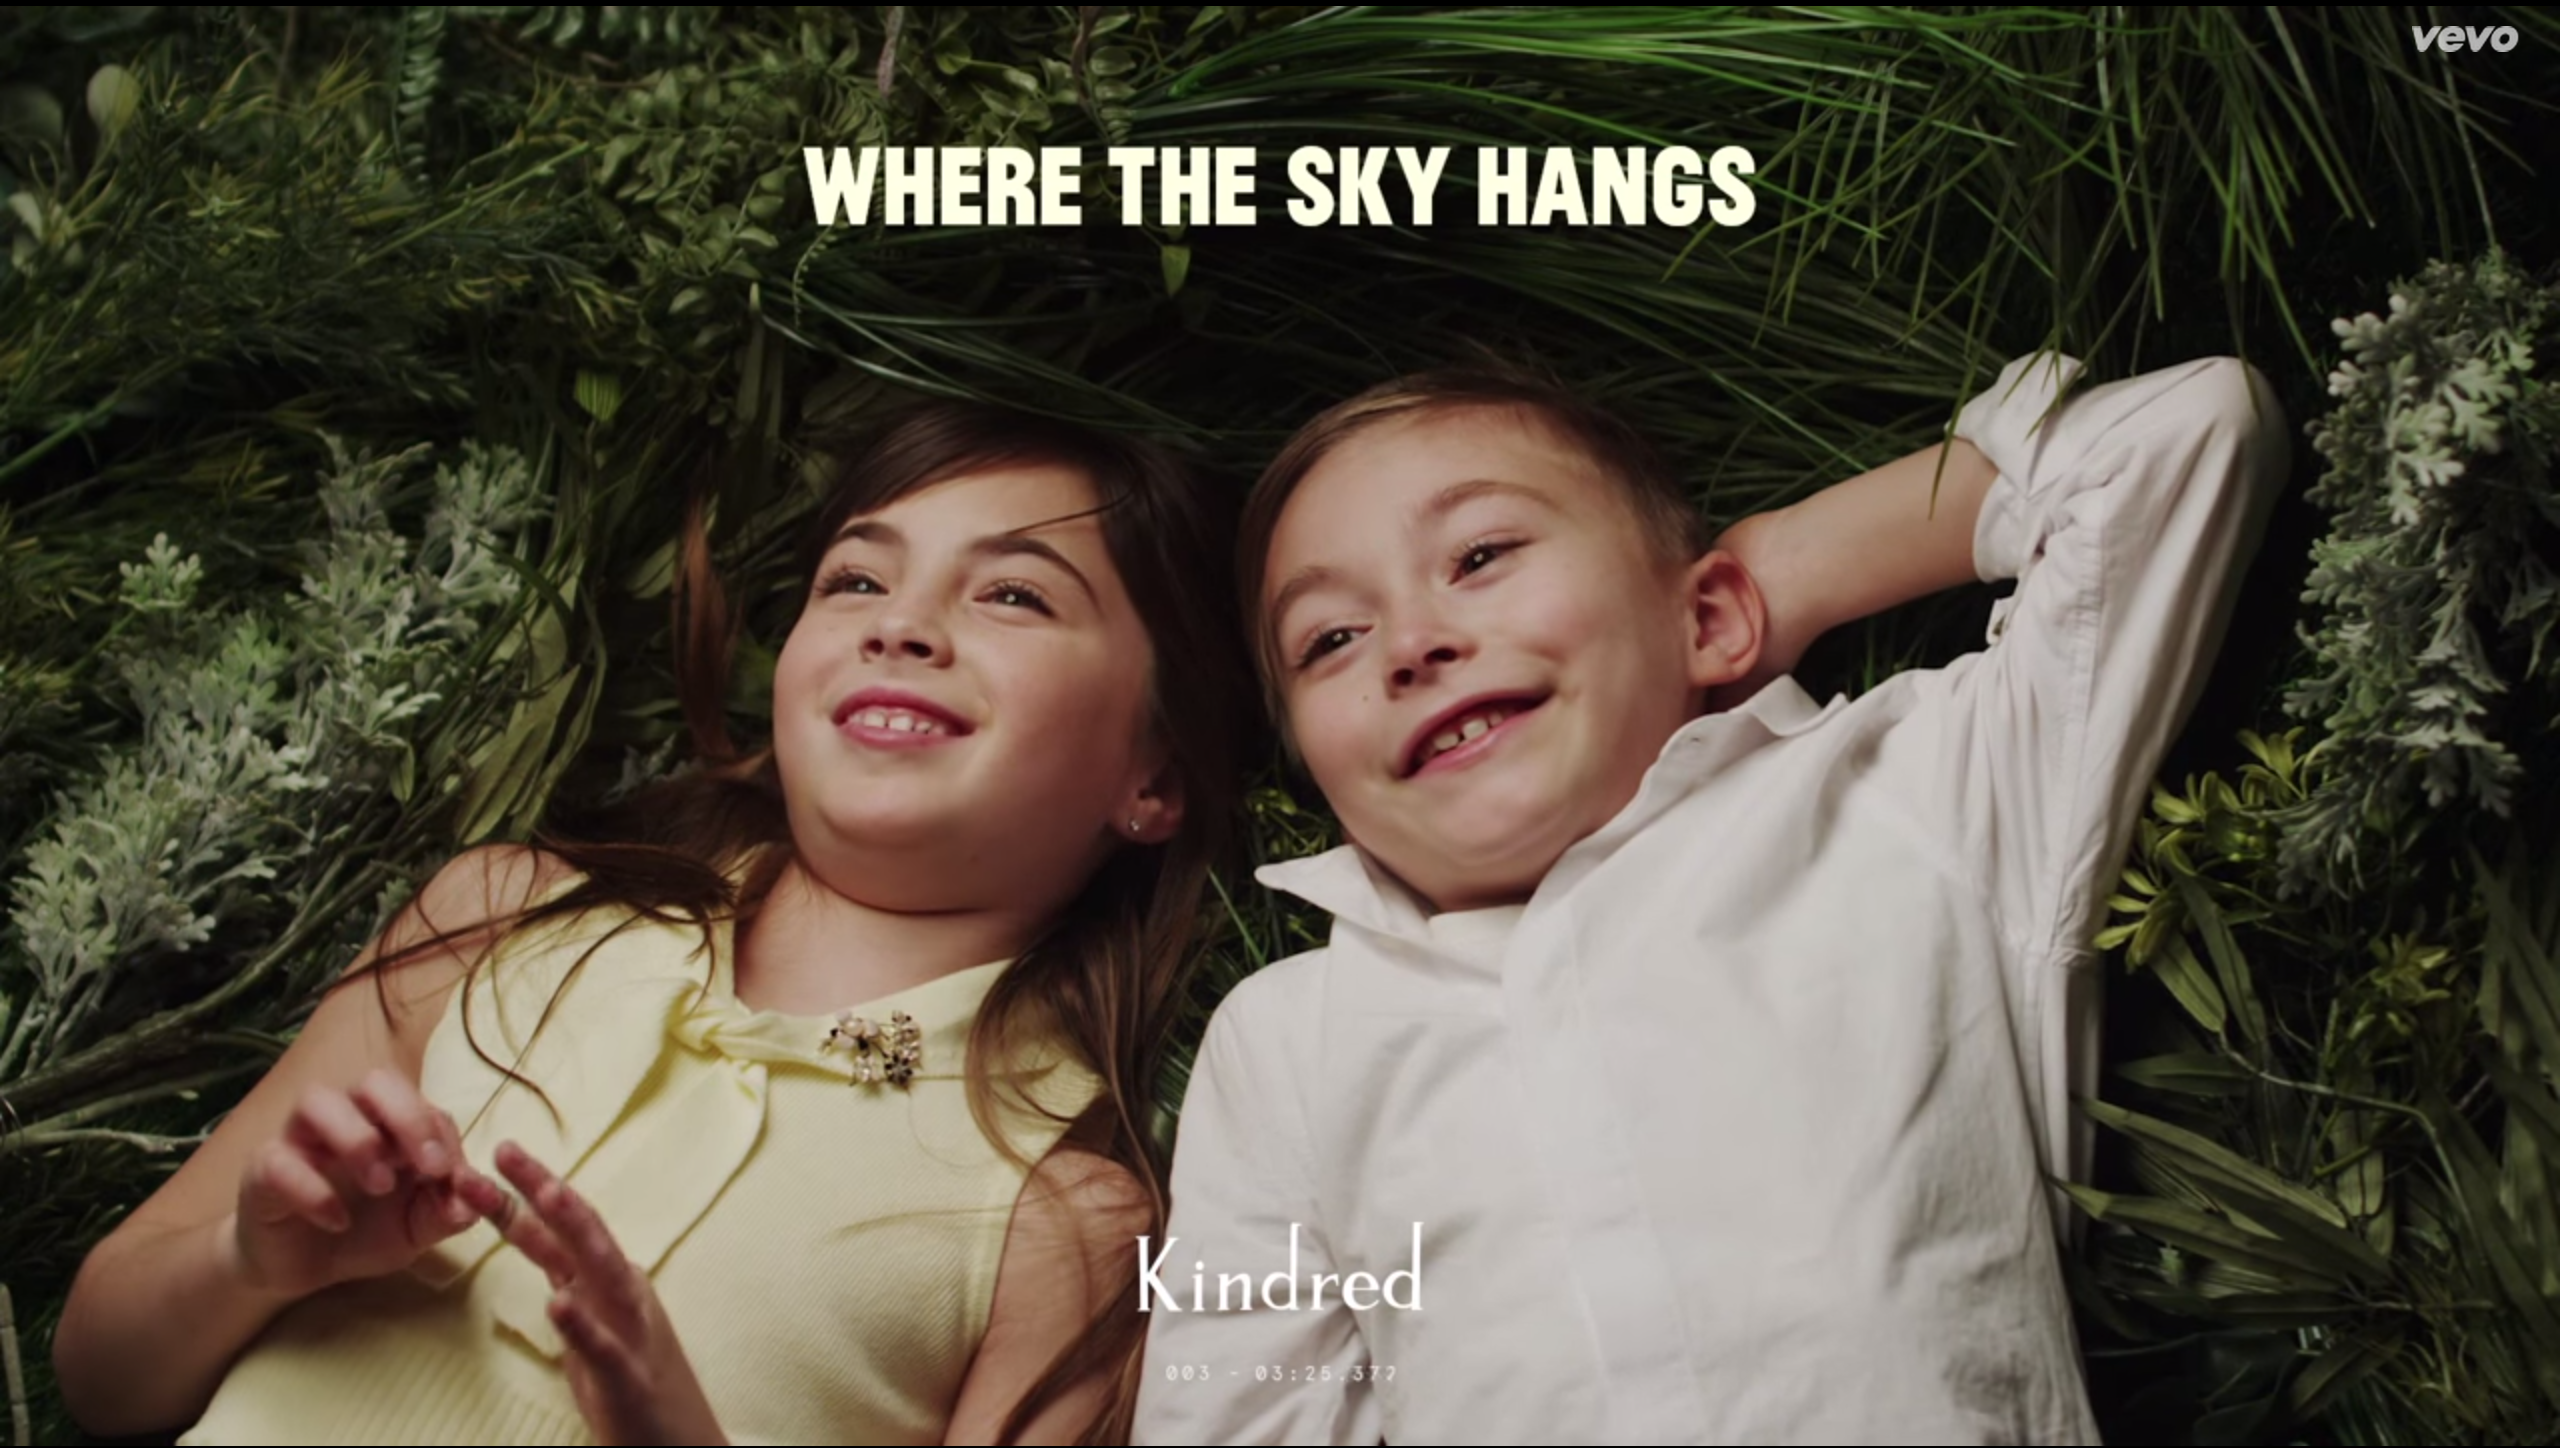 WATCH: Passion Pit Release New Video For “Where The Sky Hangs”